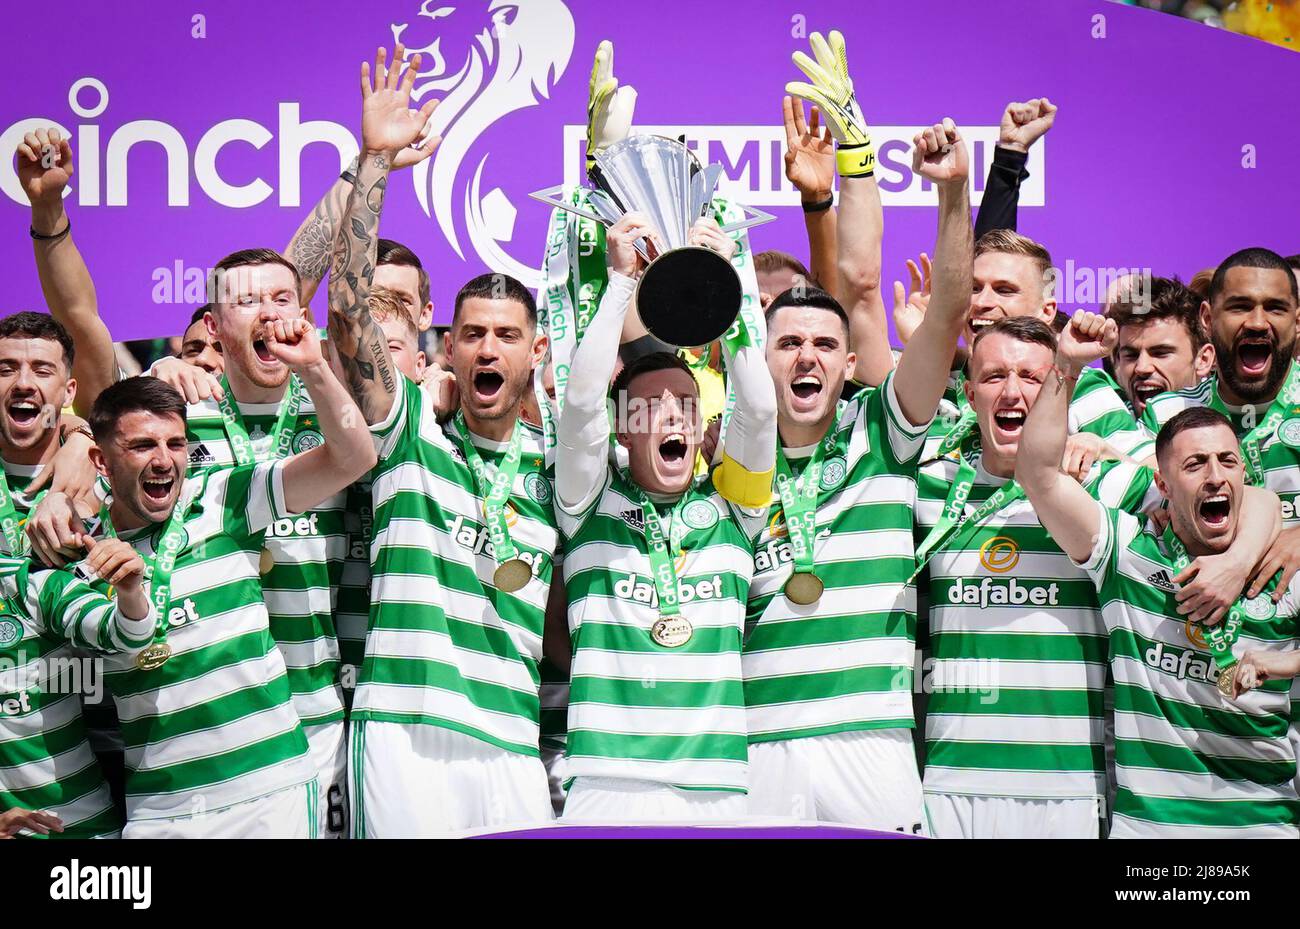 Celtic Celebrate With The League Trophy After The Cinch Premiership Match At Celtic Park Glasgow Picture Date Saturday May 14 2022 2J89A5K 